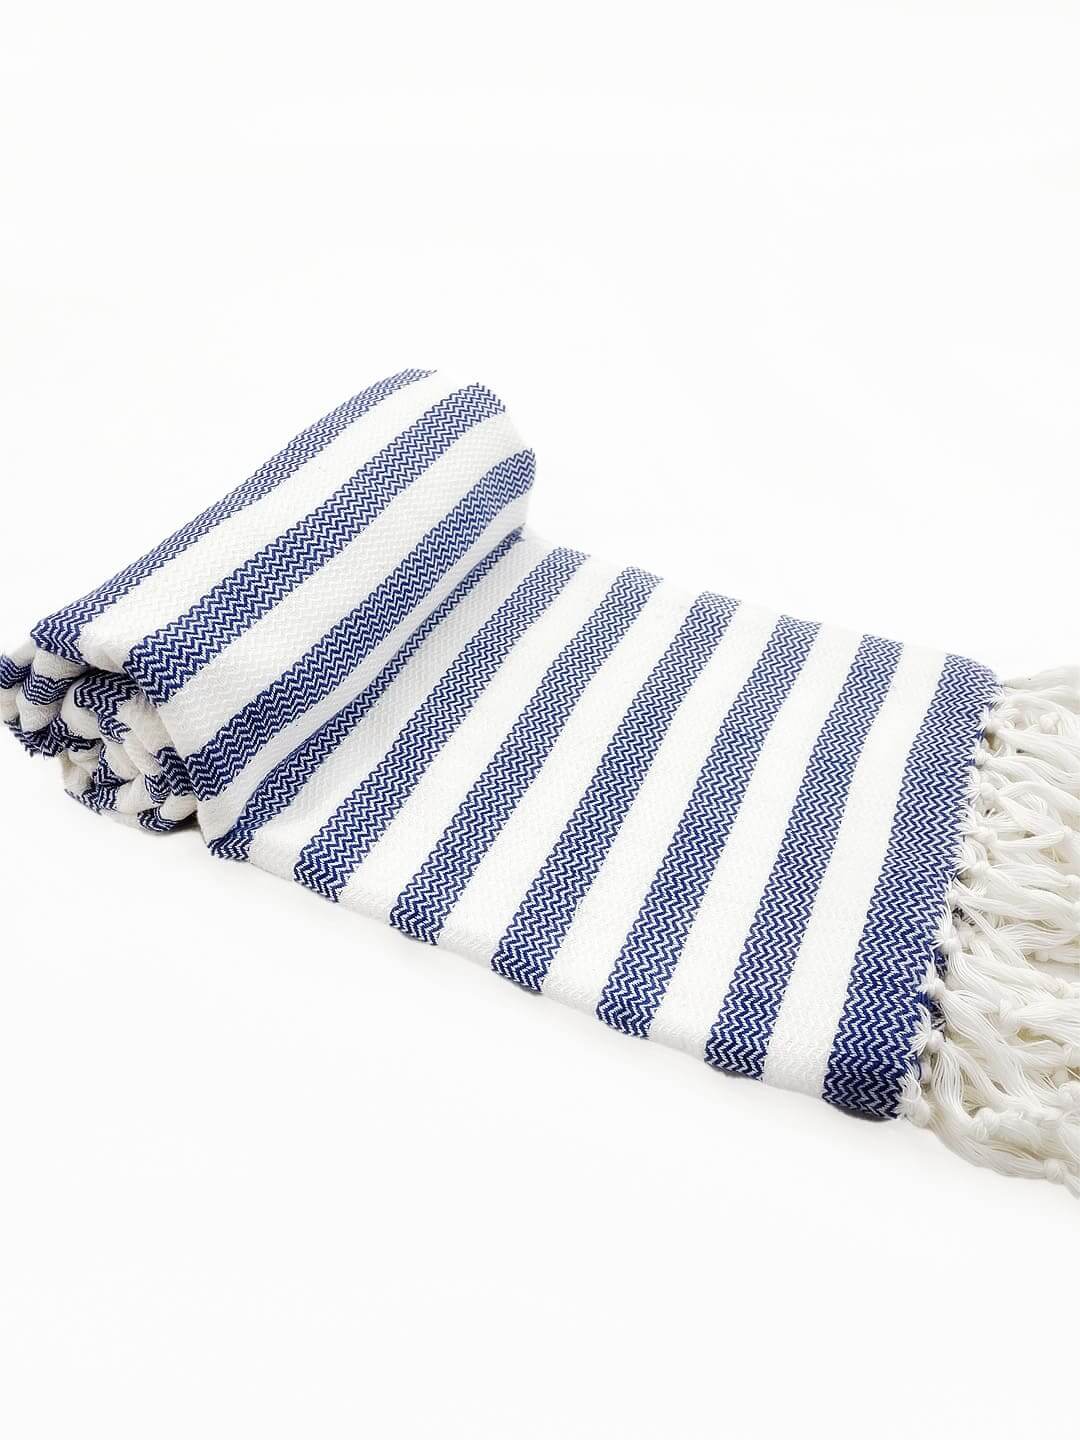 Handwoven Pure Cotton Twill Weave Towel-Off-white & Blue Stripes